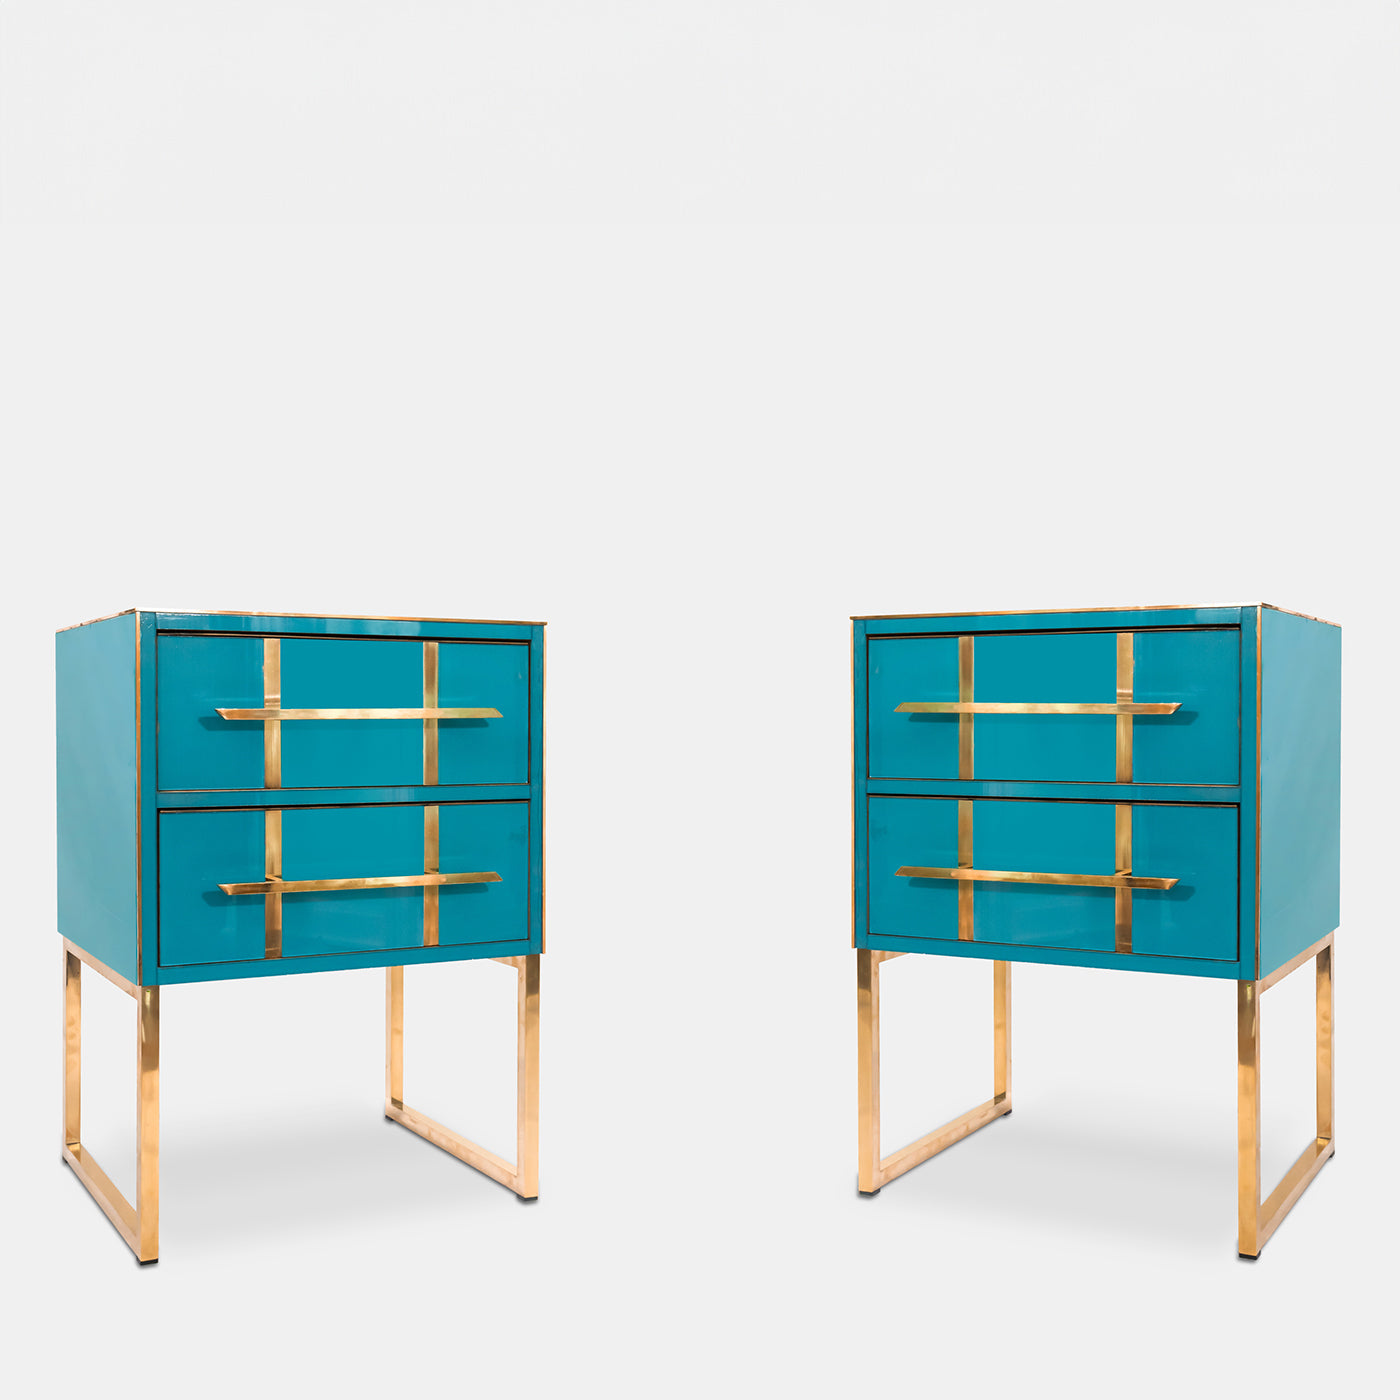 Turquoise Bedside Table - Alternative view 1